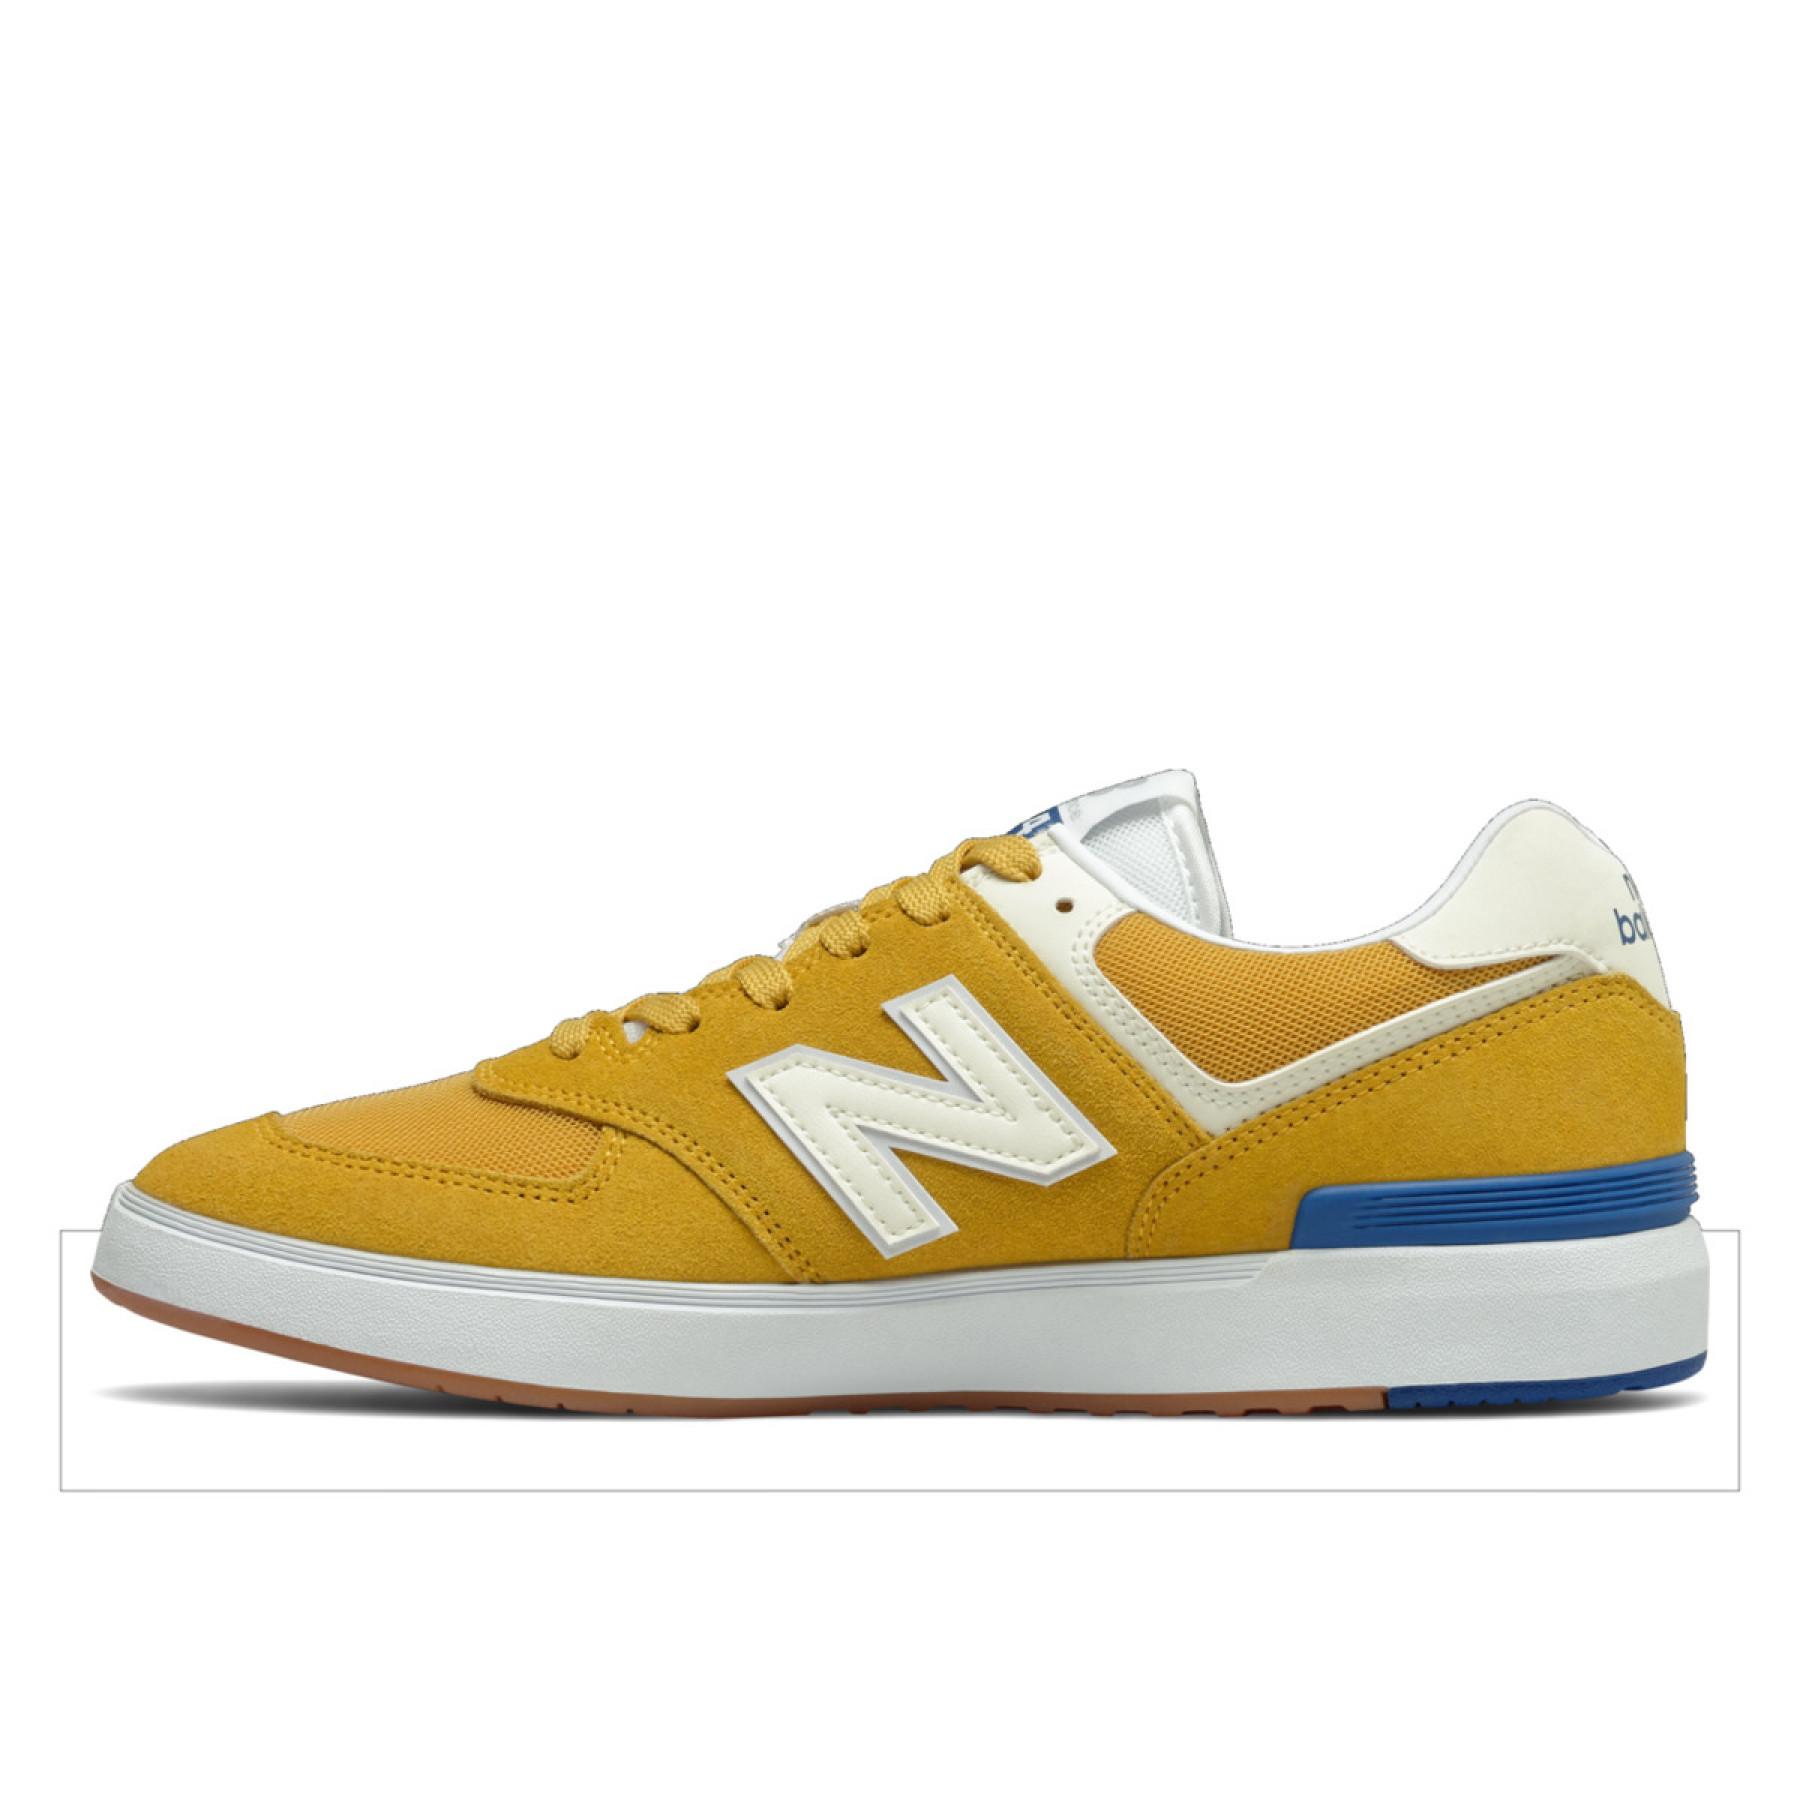 Sneakers New Balance all coasts am574